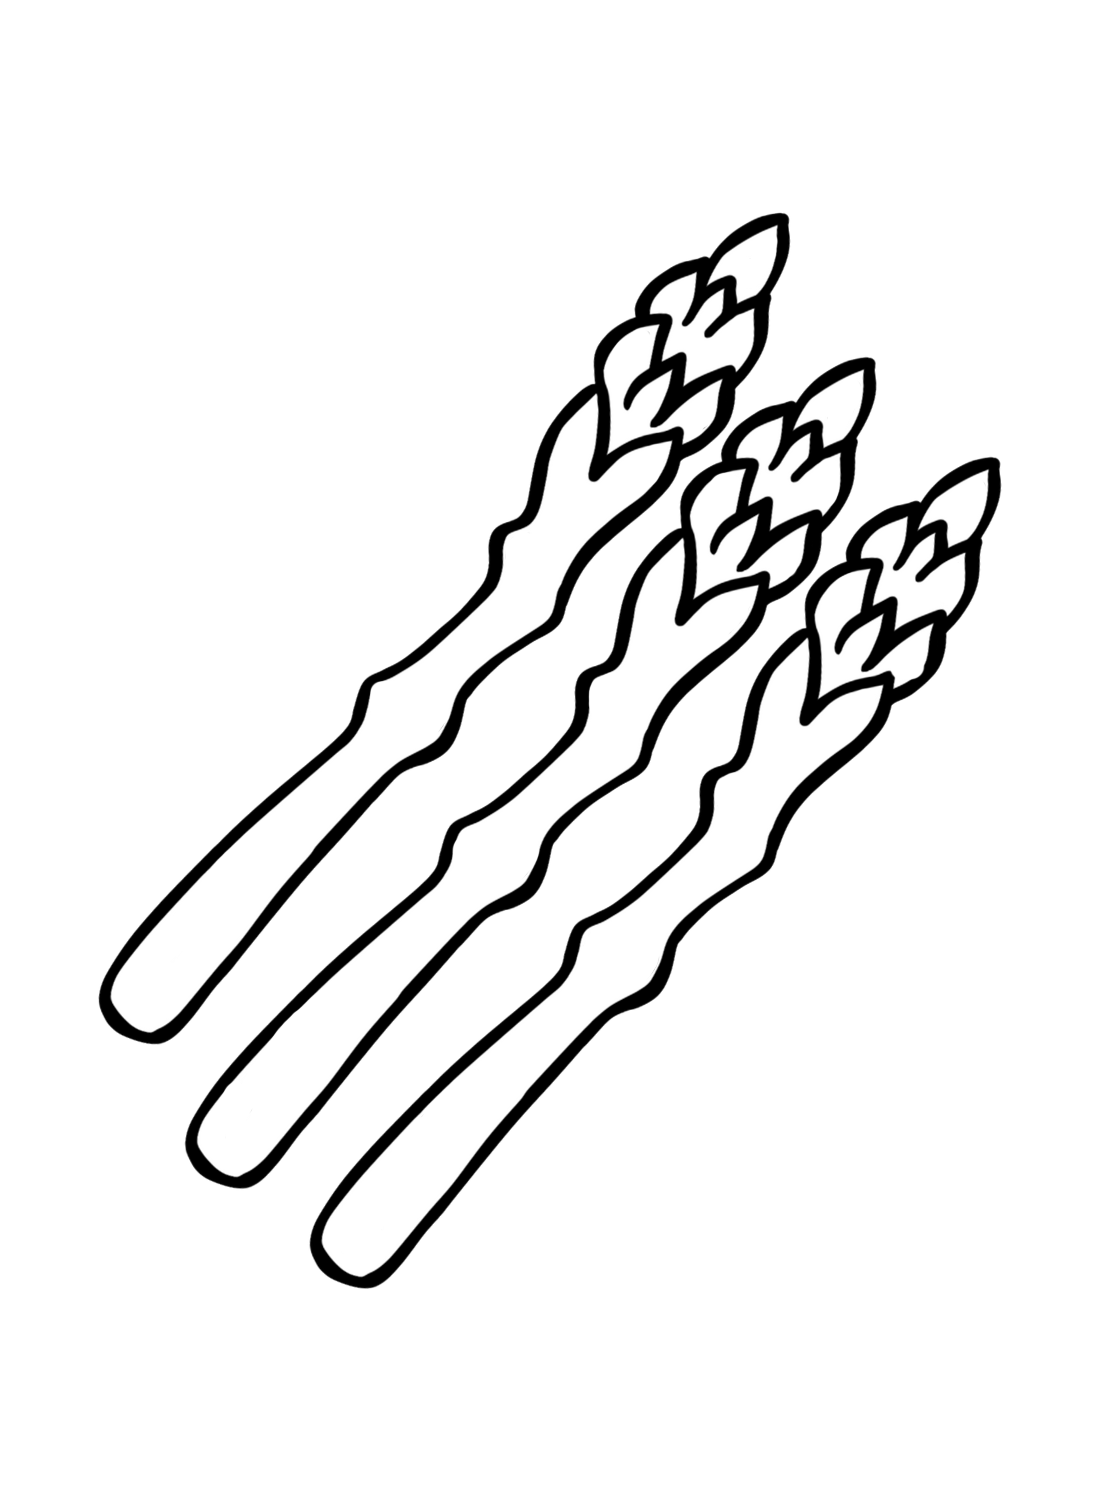 Asparagus Simple Coloring Page